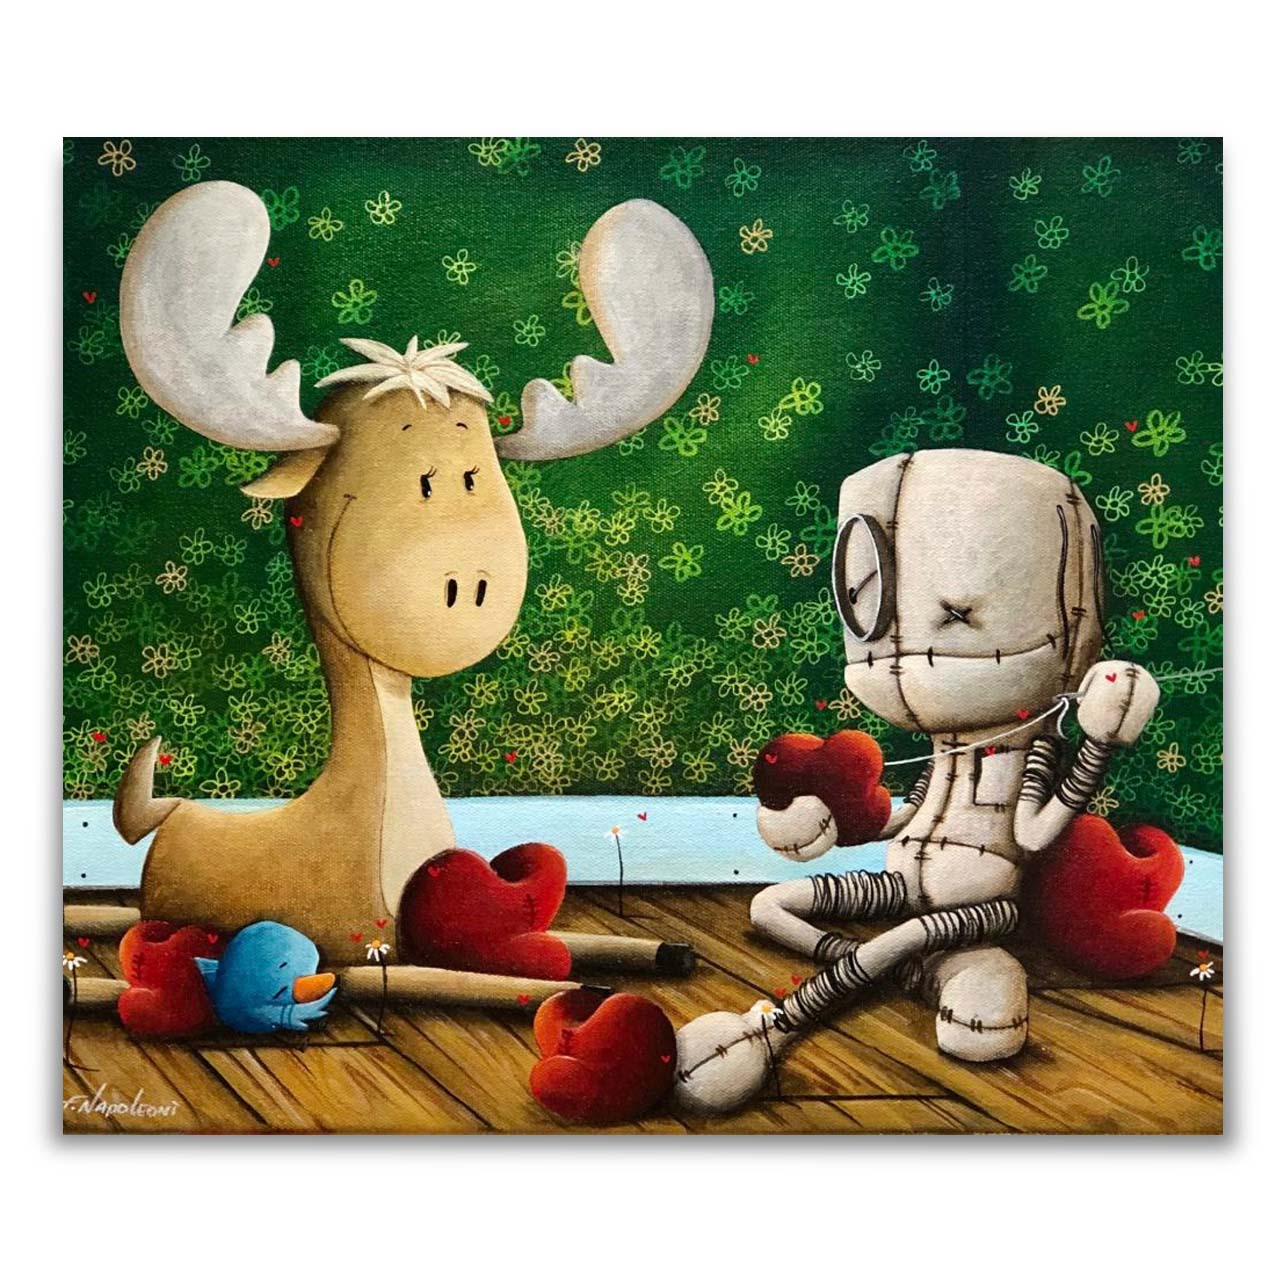 Fabio Napoleoni "Tough As Nails" Limited Edition Paper Giclee